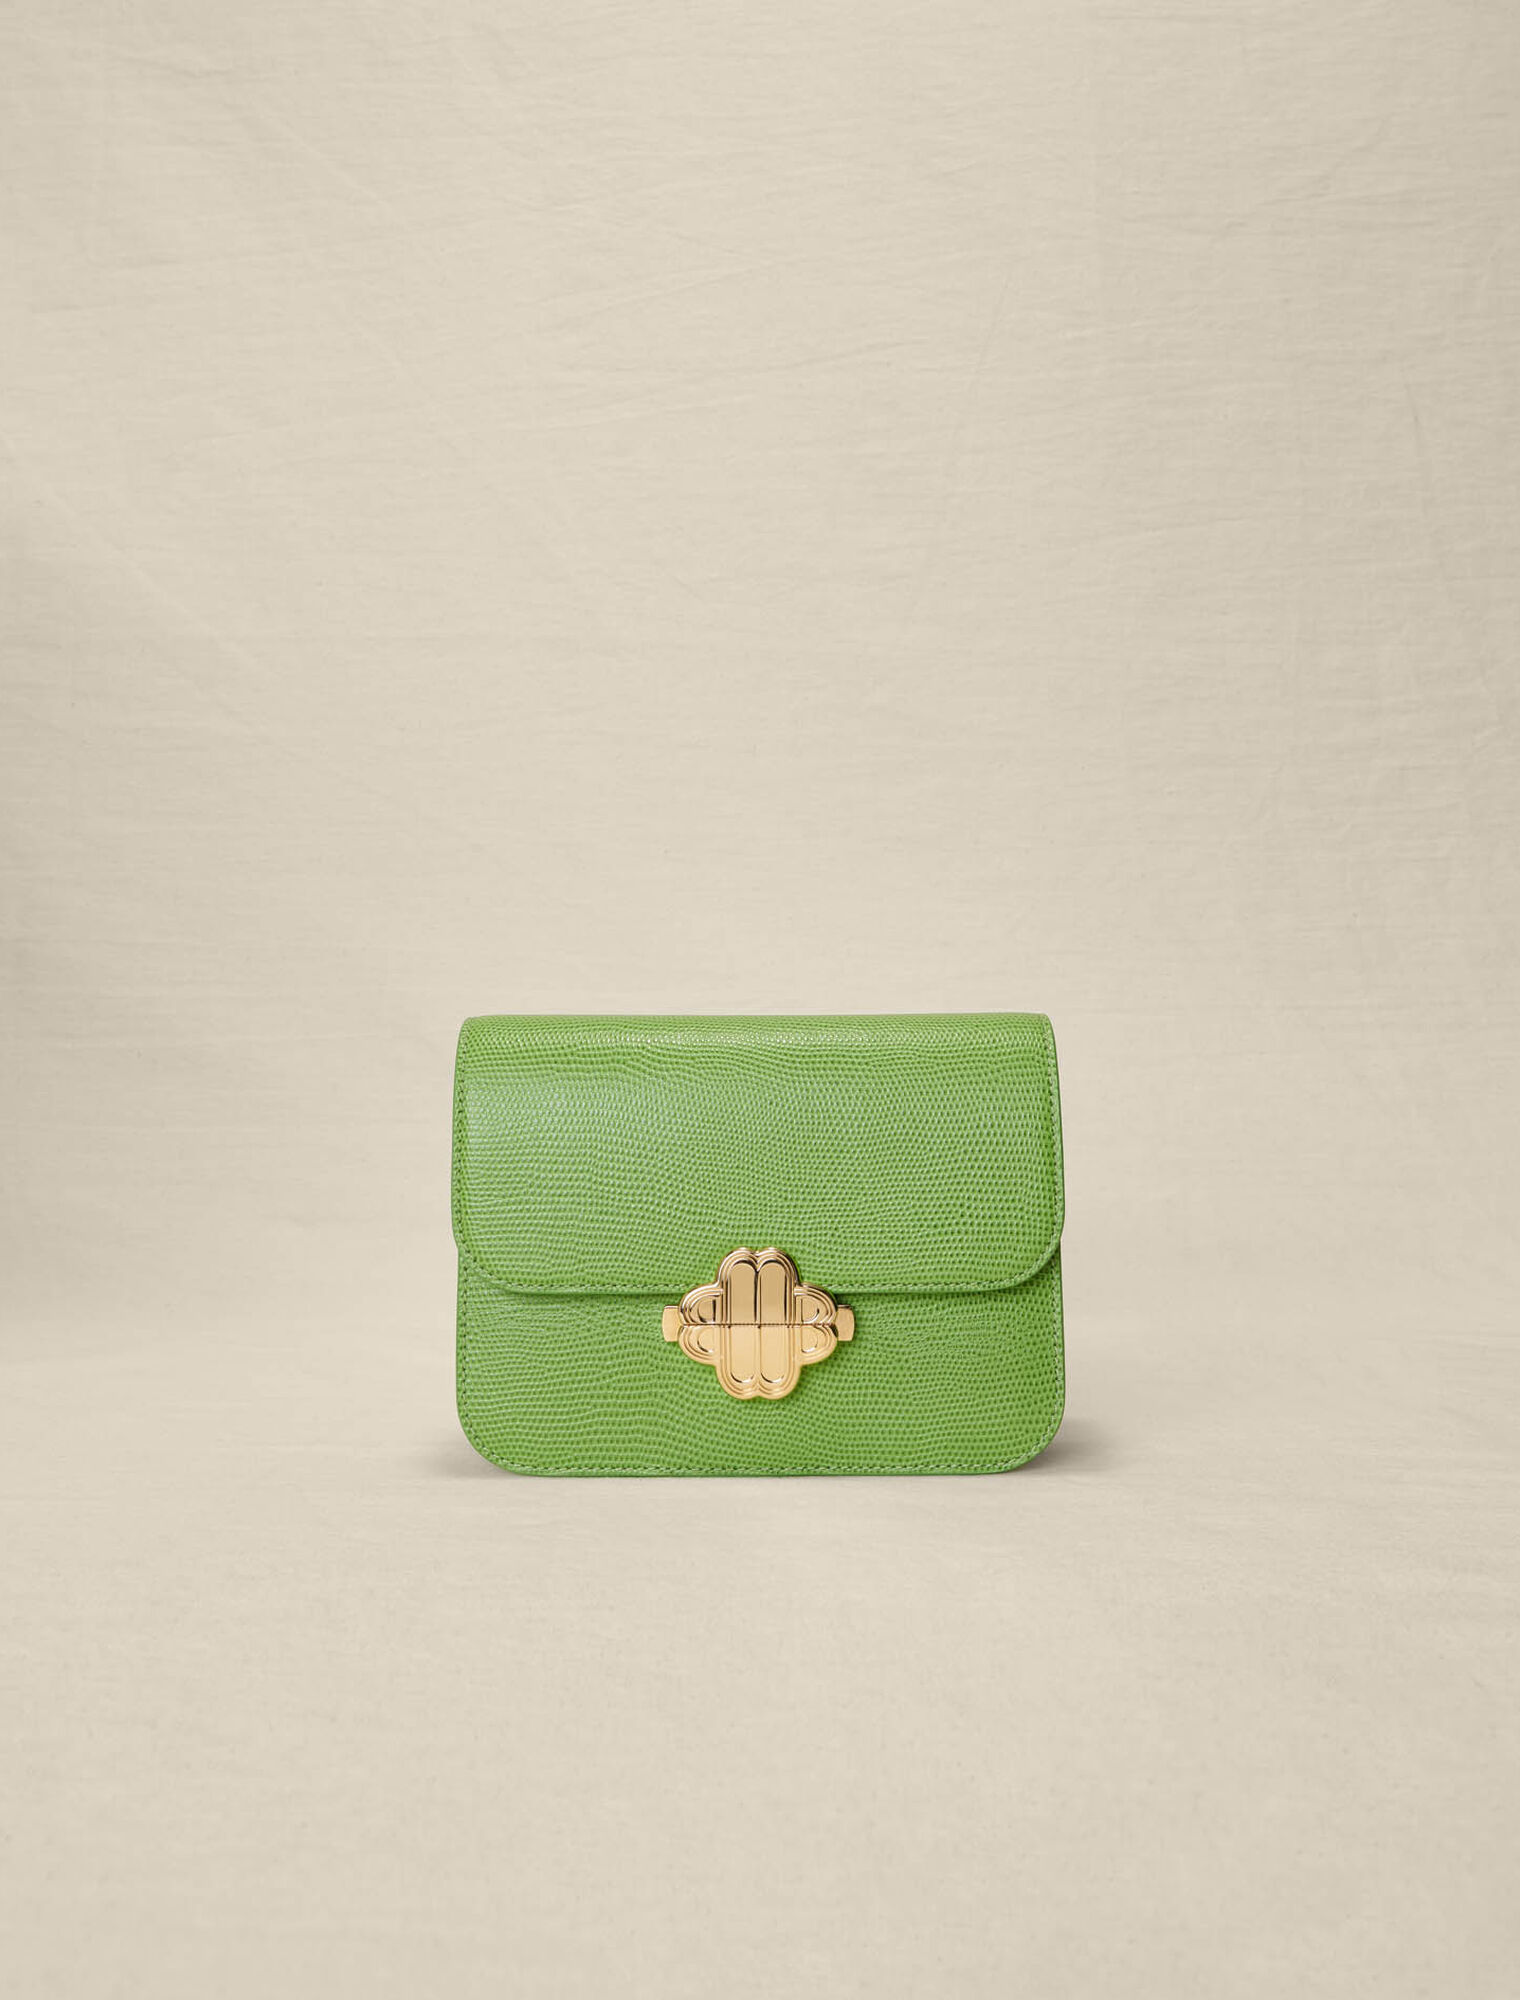 Clover bag in lizard-effect leather